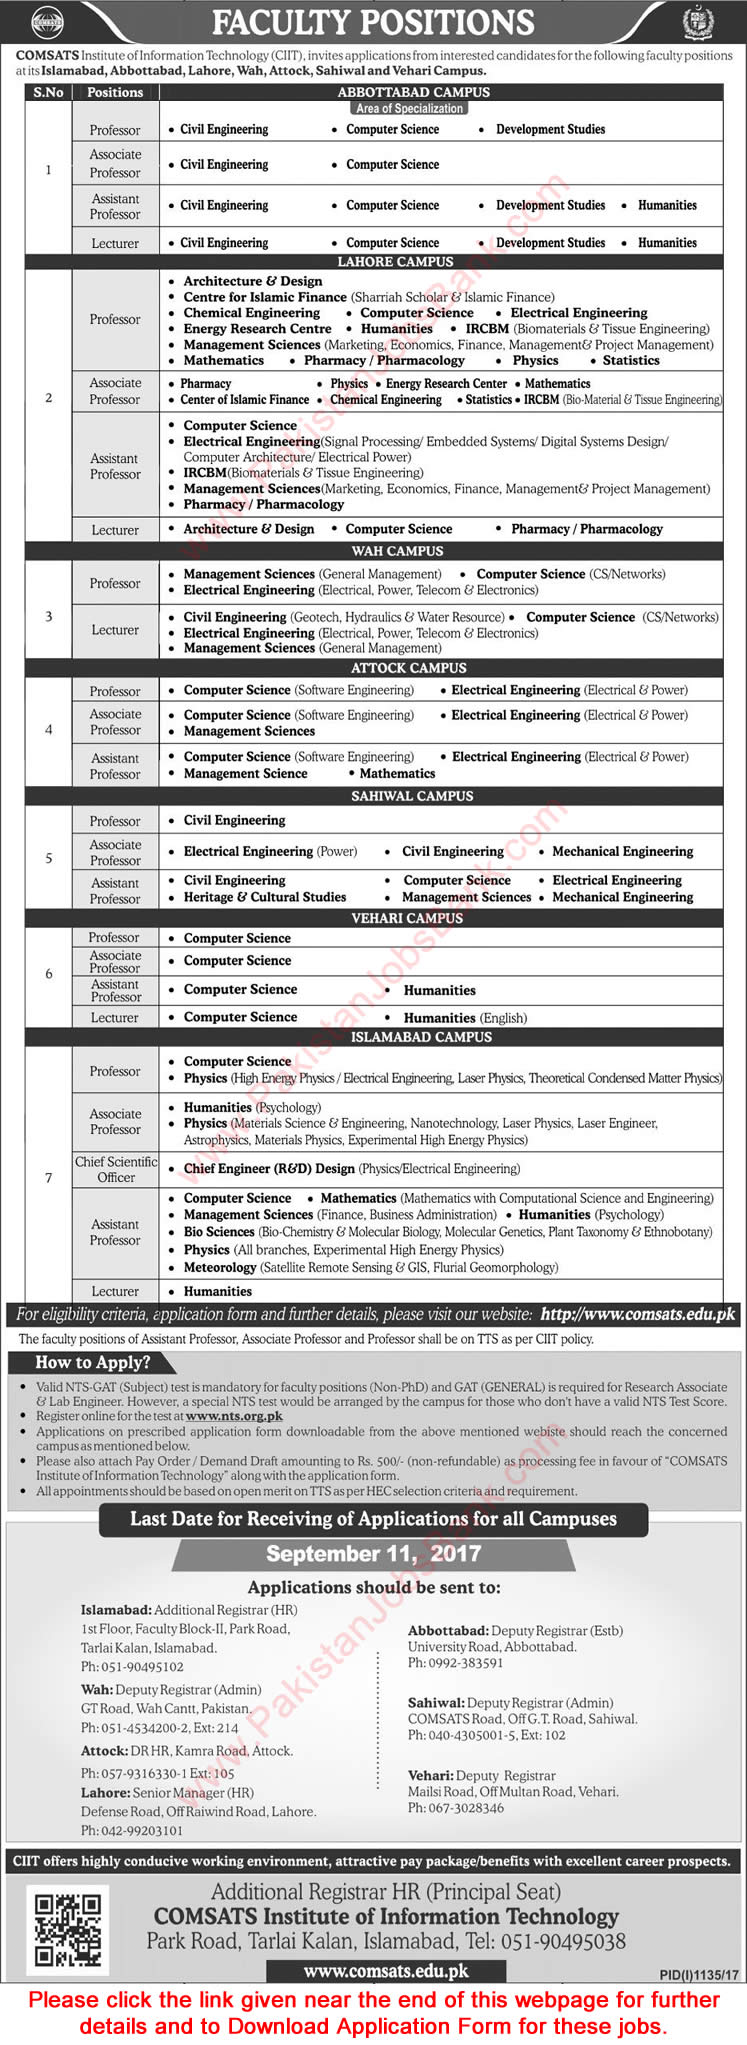 COMSATS Jobs August 2017 September CIIT Application Form Teaching Faculty & Chief Scientific Officer Latest